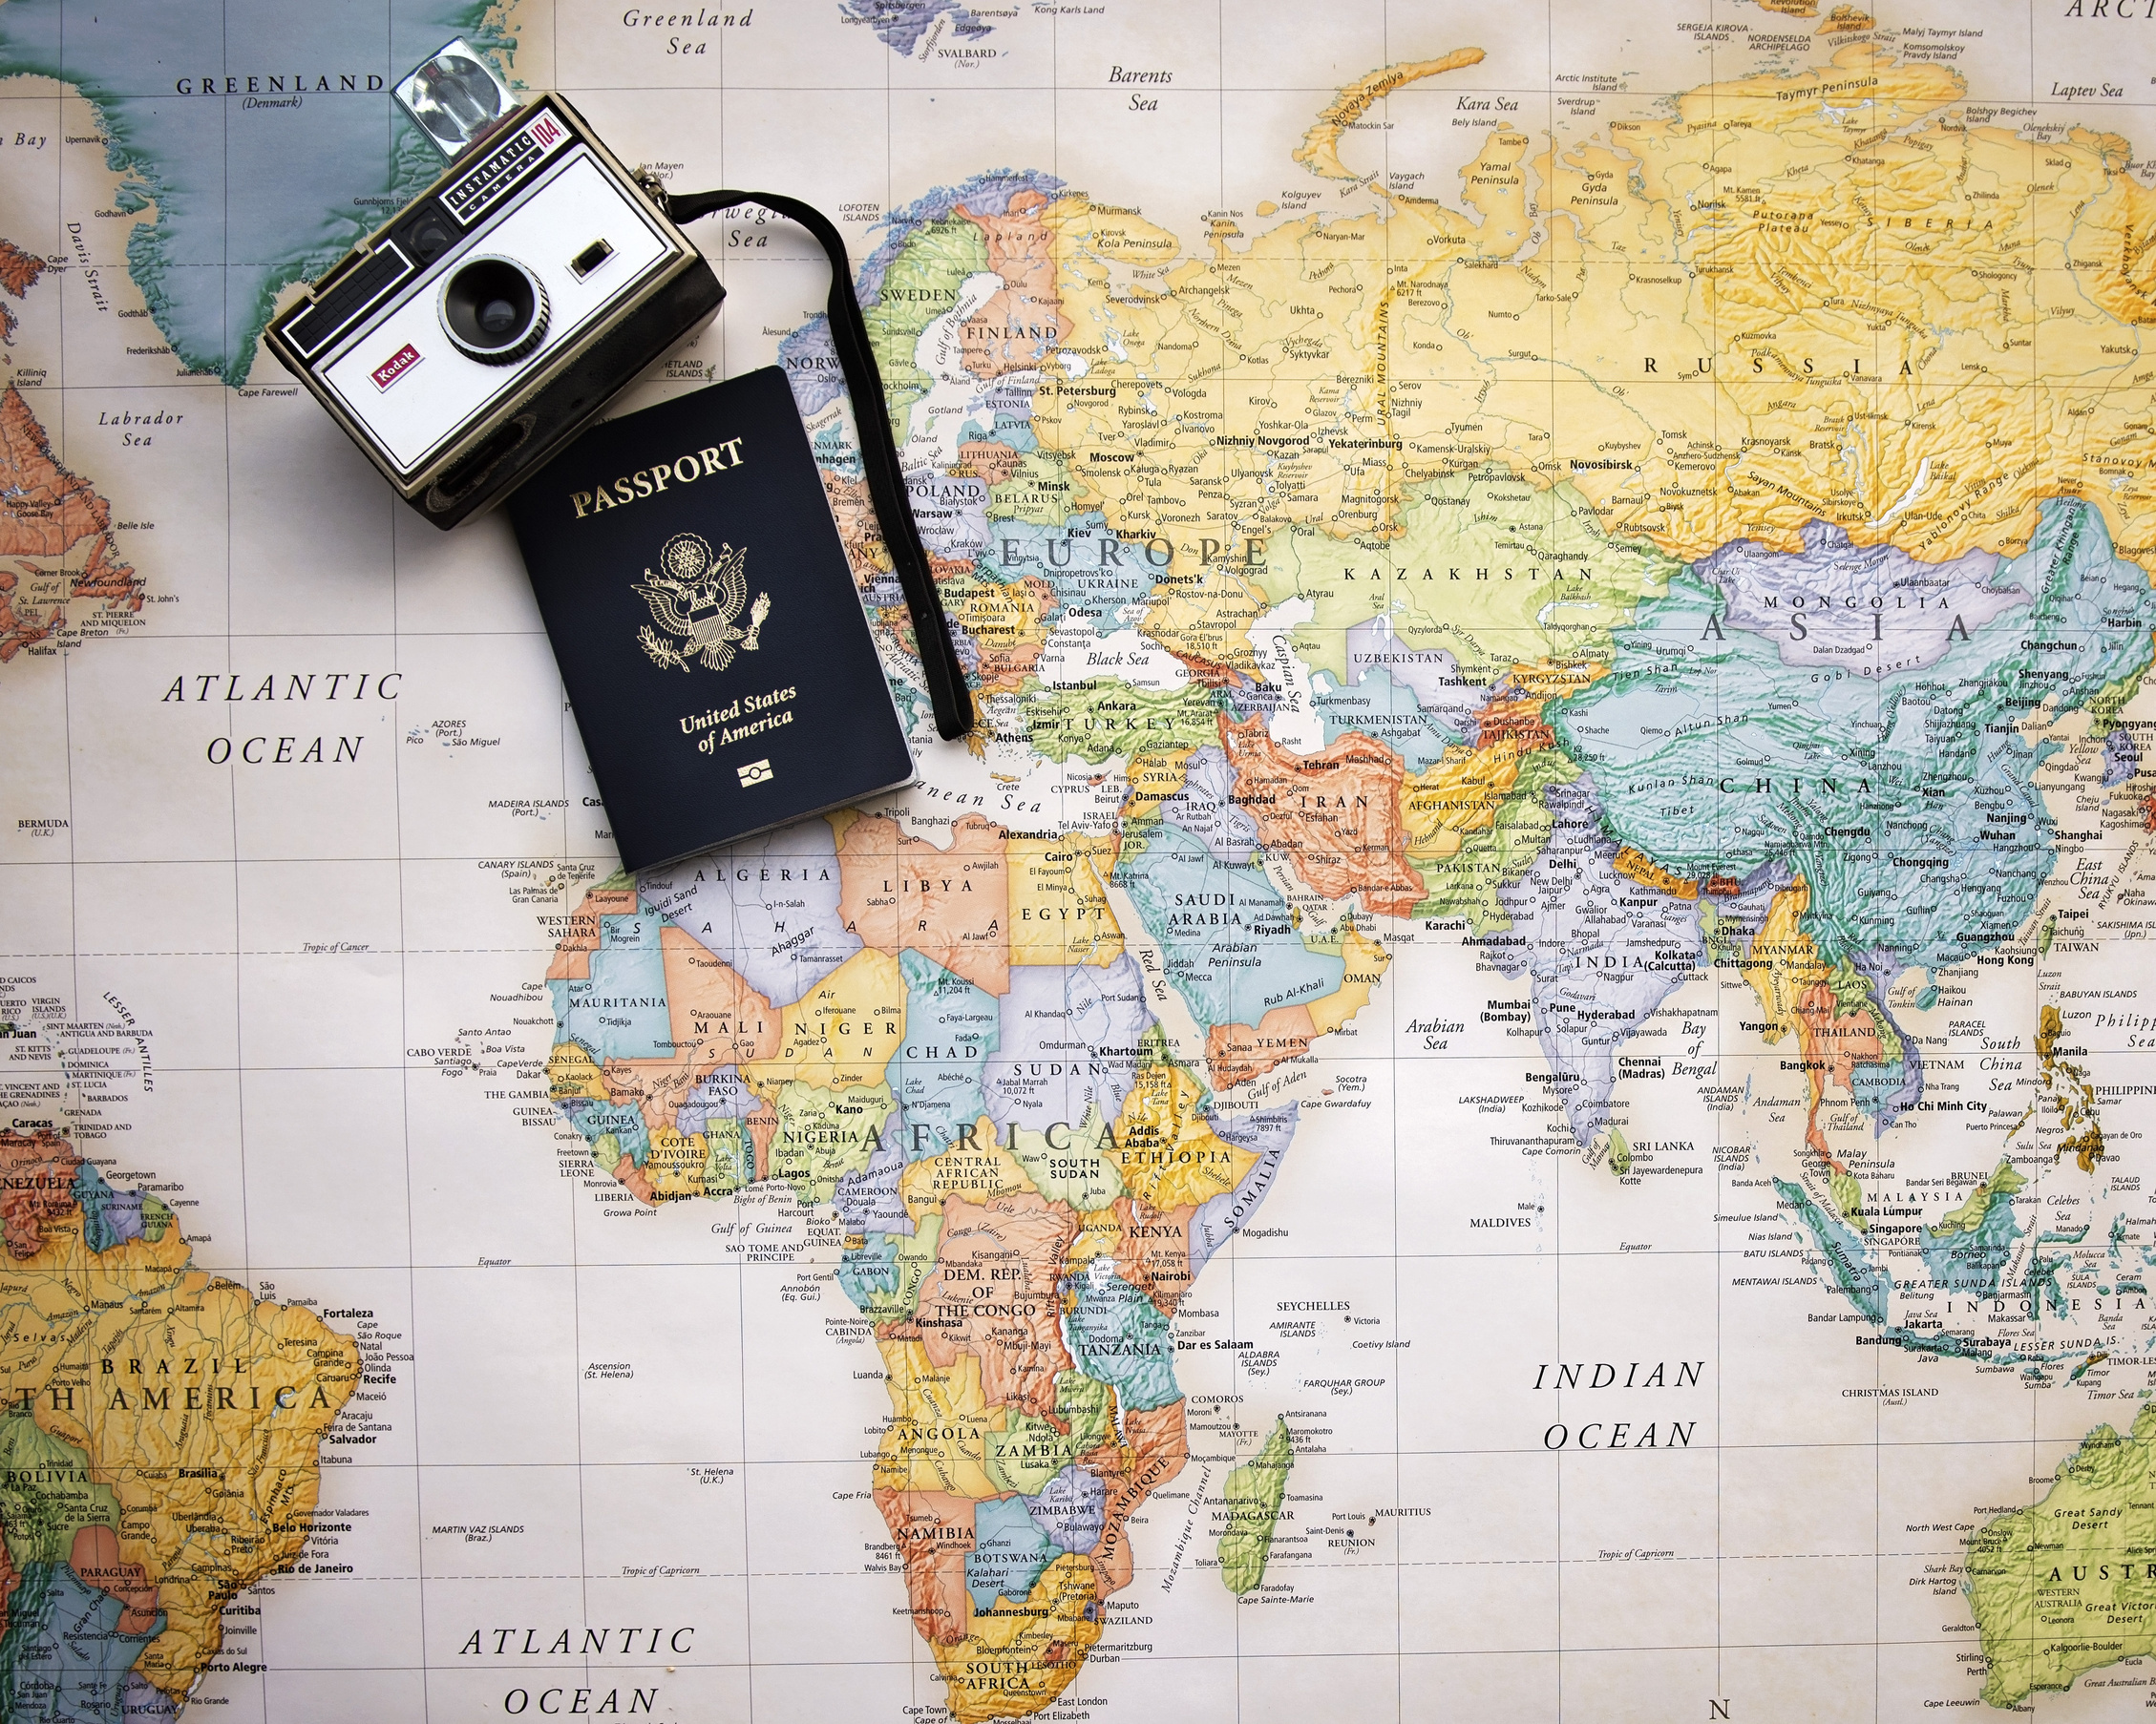 Passport and Vintage Camera on a World Map